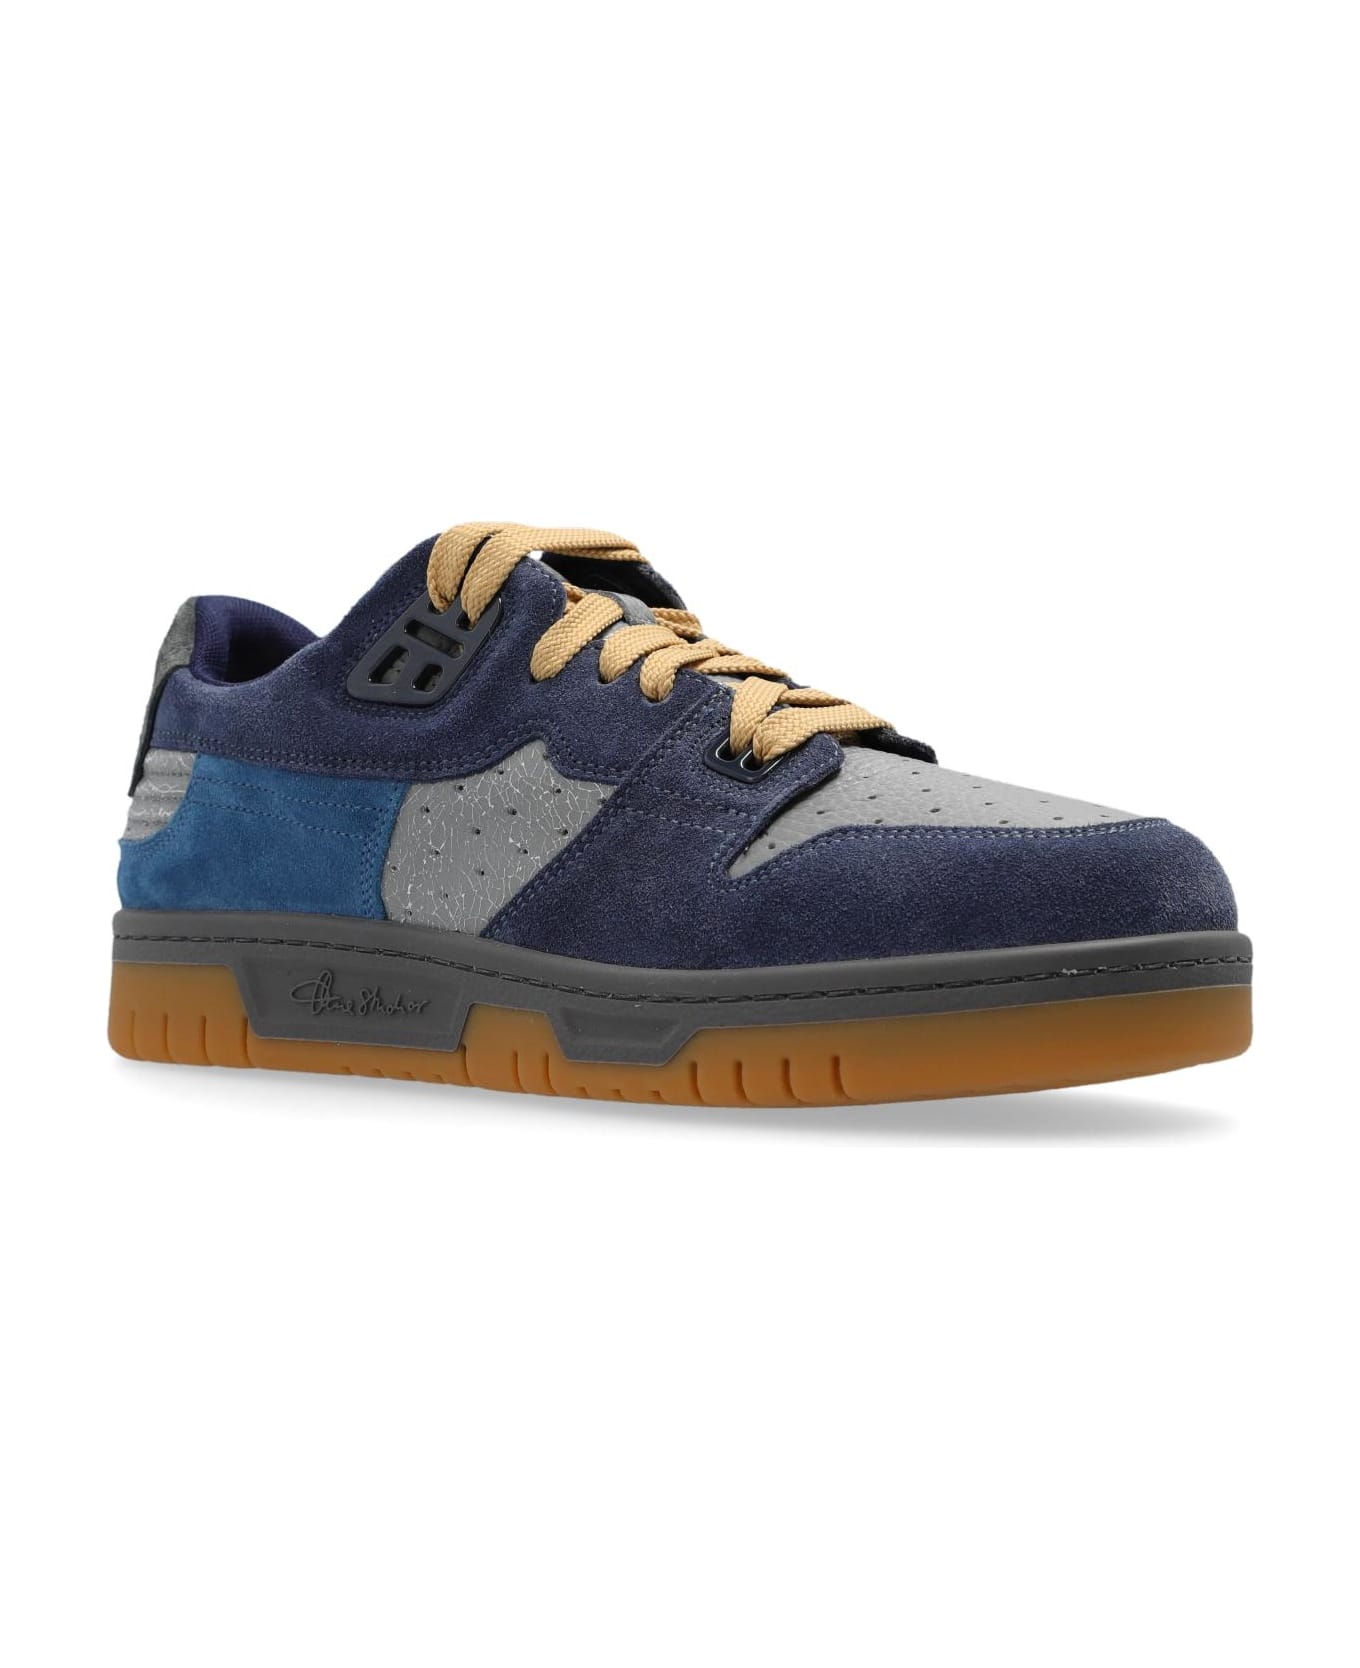 Acne Studios Leather Sneakers - Afs Grey/blue